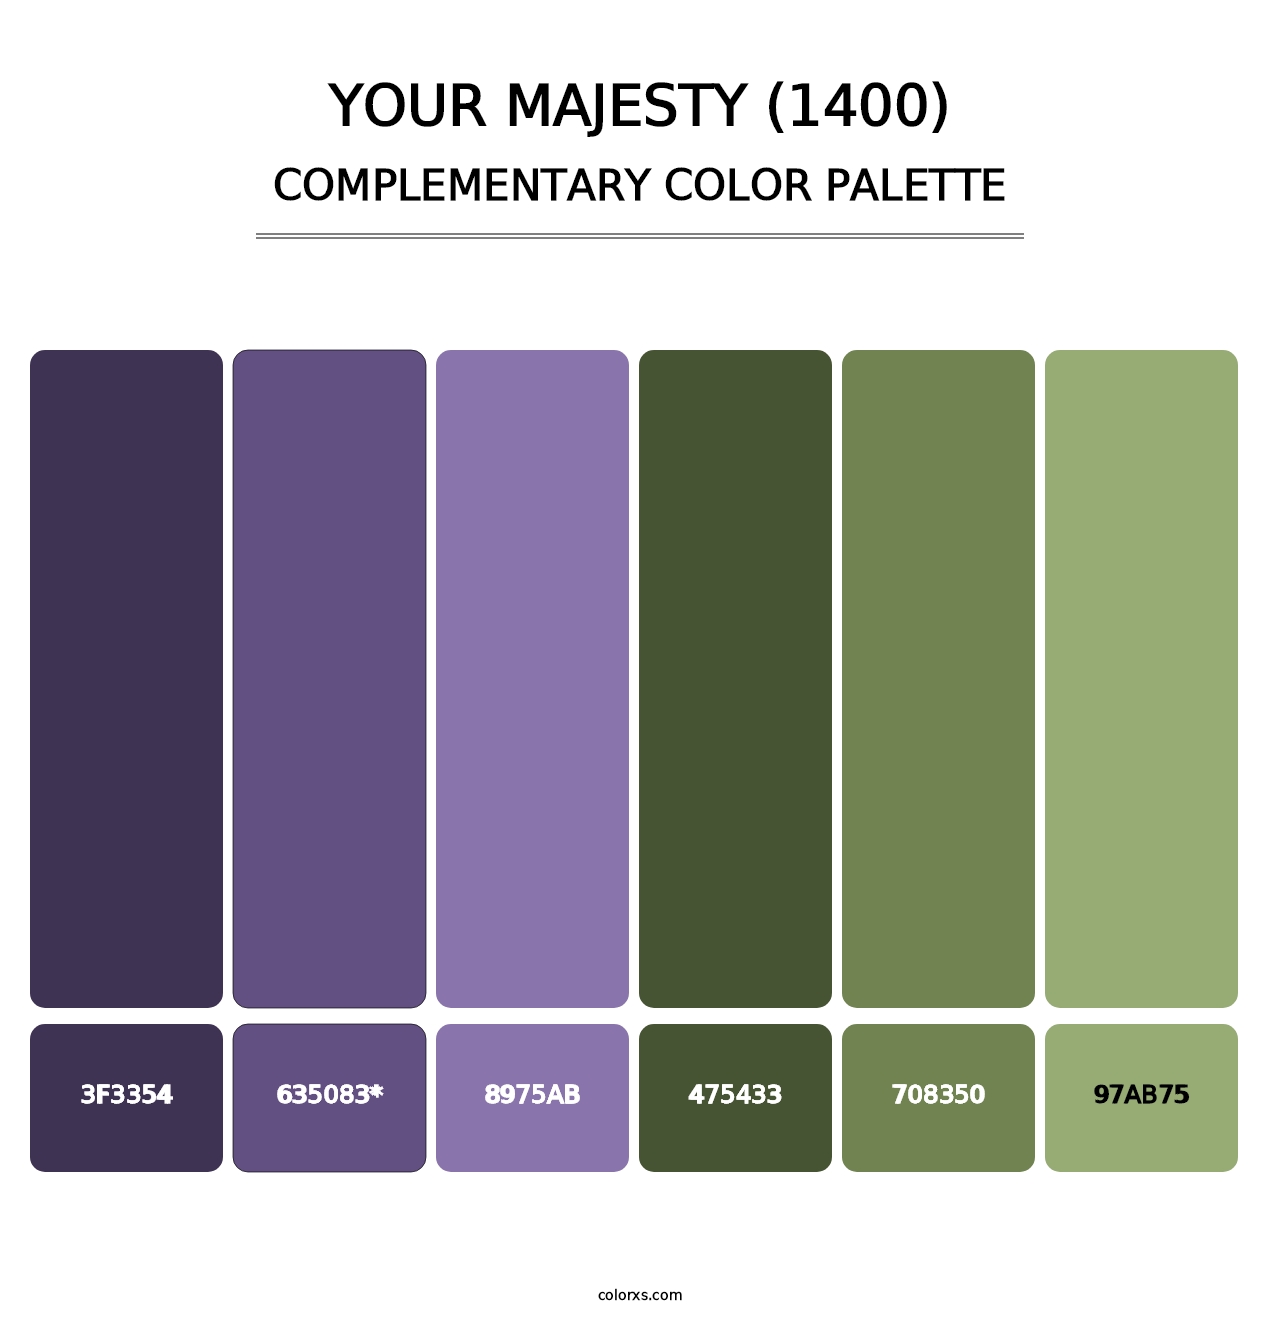 Your Majesty (1400) - Complementary Color Palette